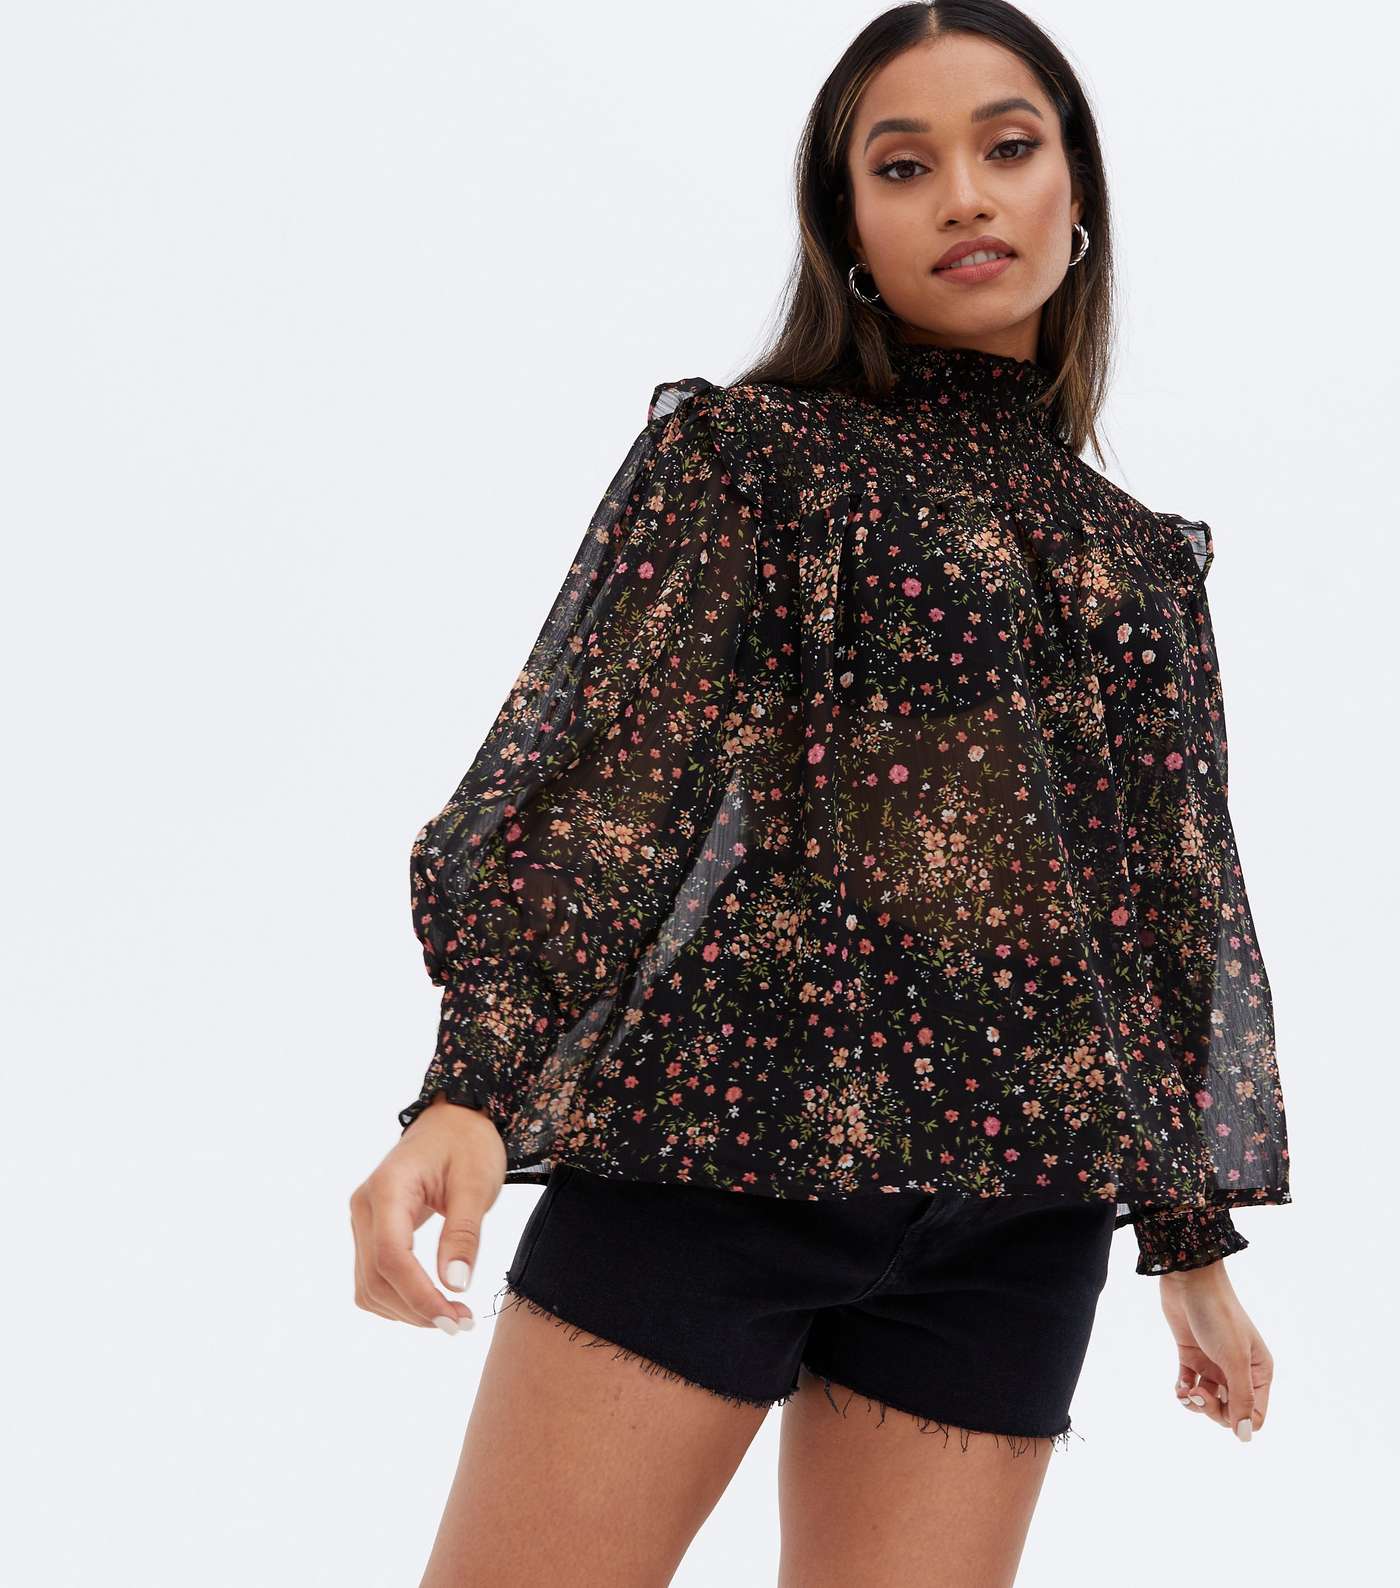 Petite Black Ditsy Floral Chiffon High Neck Puff Sleeve Blouse